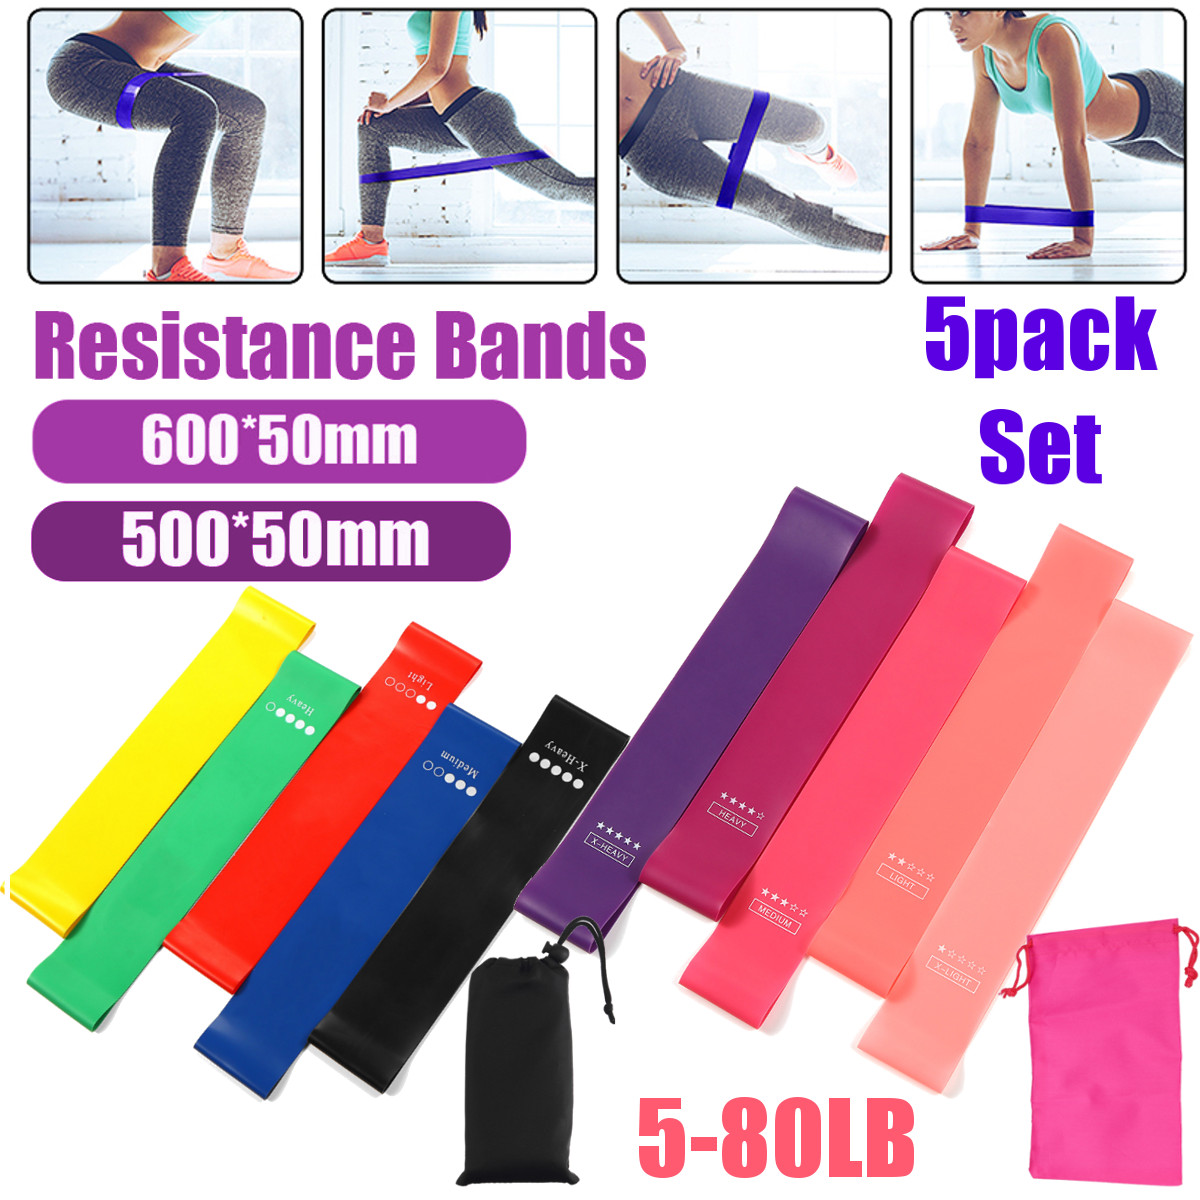 15pcs-Latex-Resistance-Bands-Strength-Training-Exercise-Fitness-Home-Yoga-60050mm-1678687-1